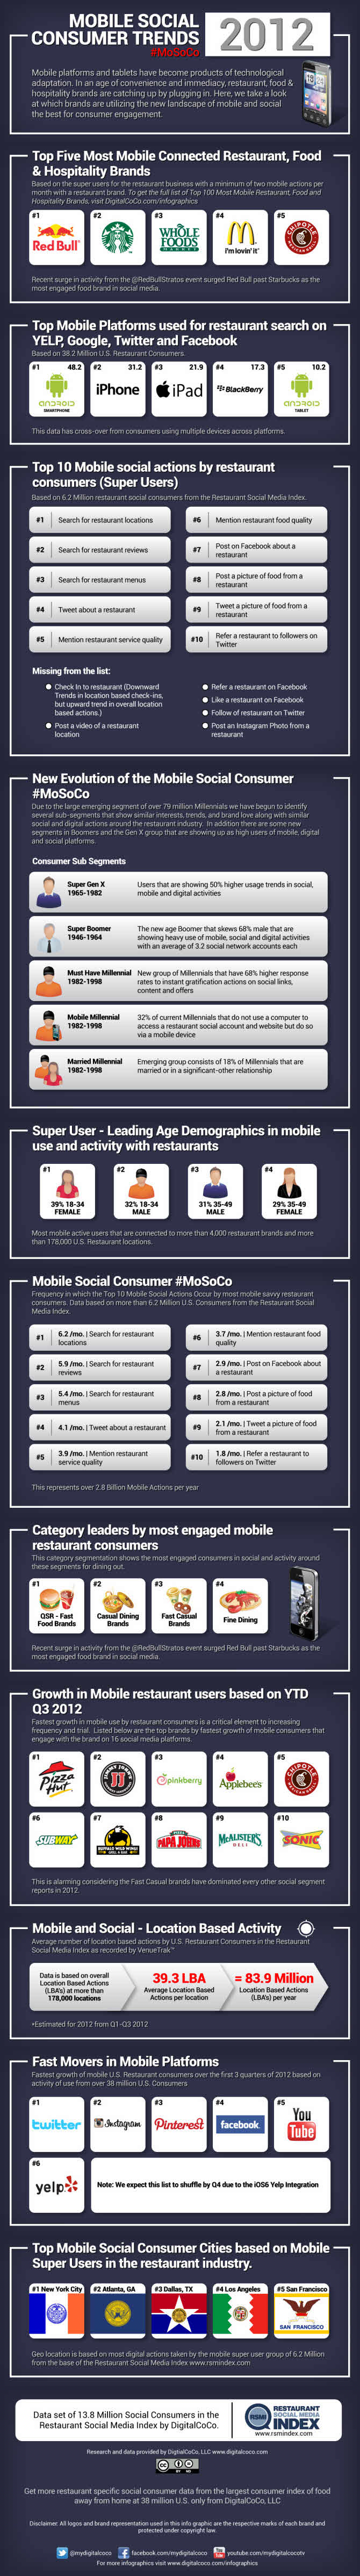 2012 Mobile Social Consumer Trends Infographic